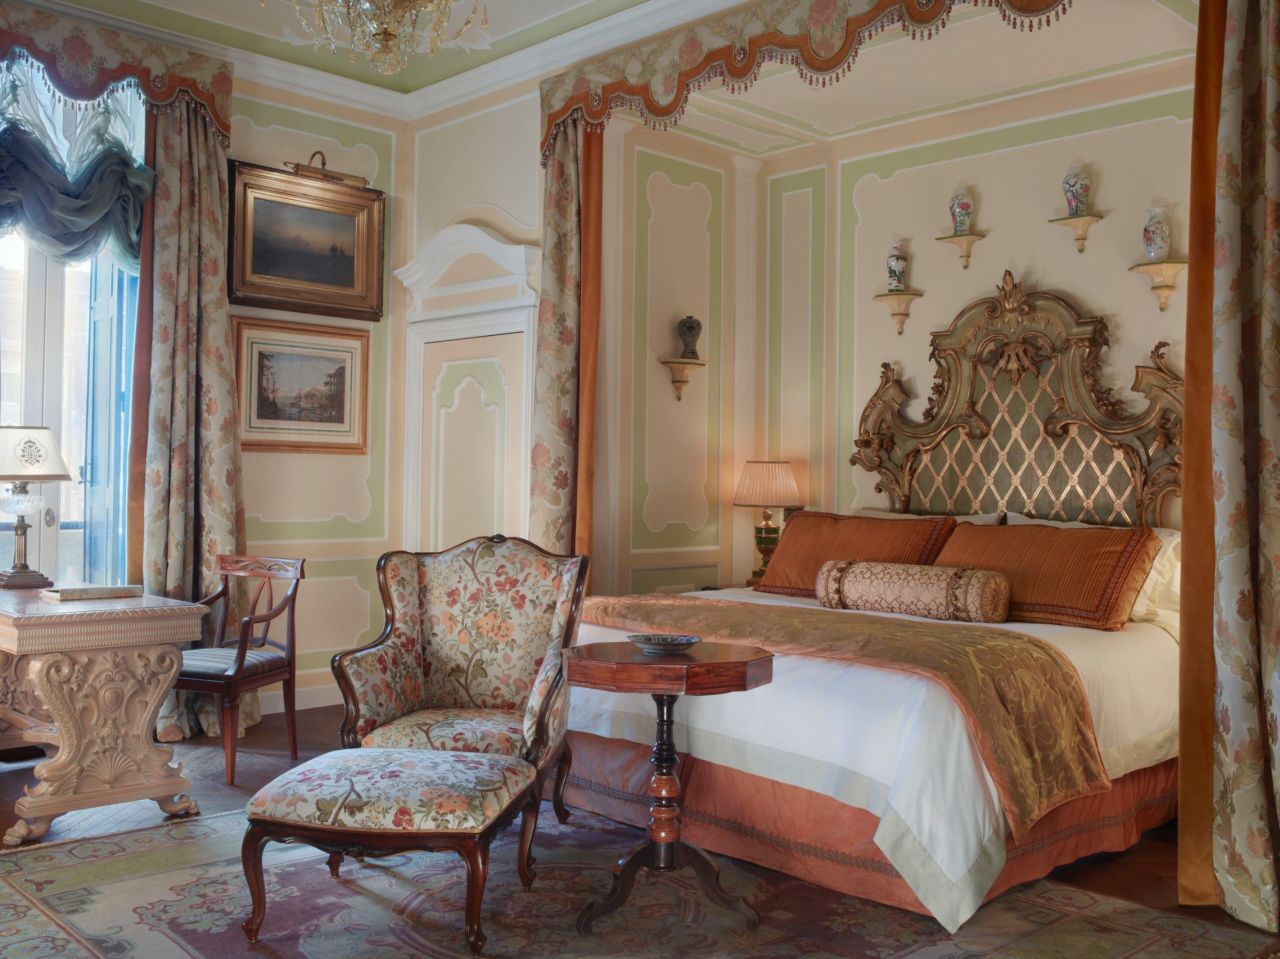 Gritti Palace rooms are furnished with Venetian antiques, exquisite original art and rich brocade silks.